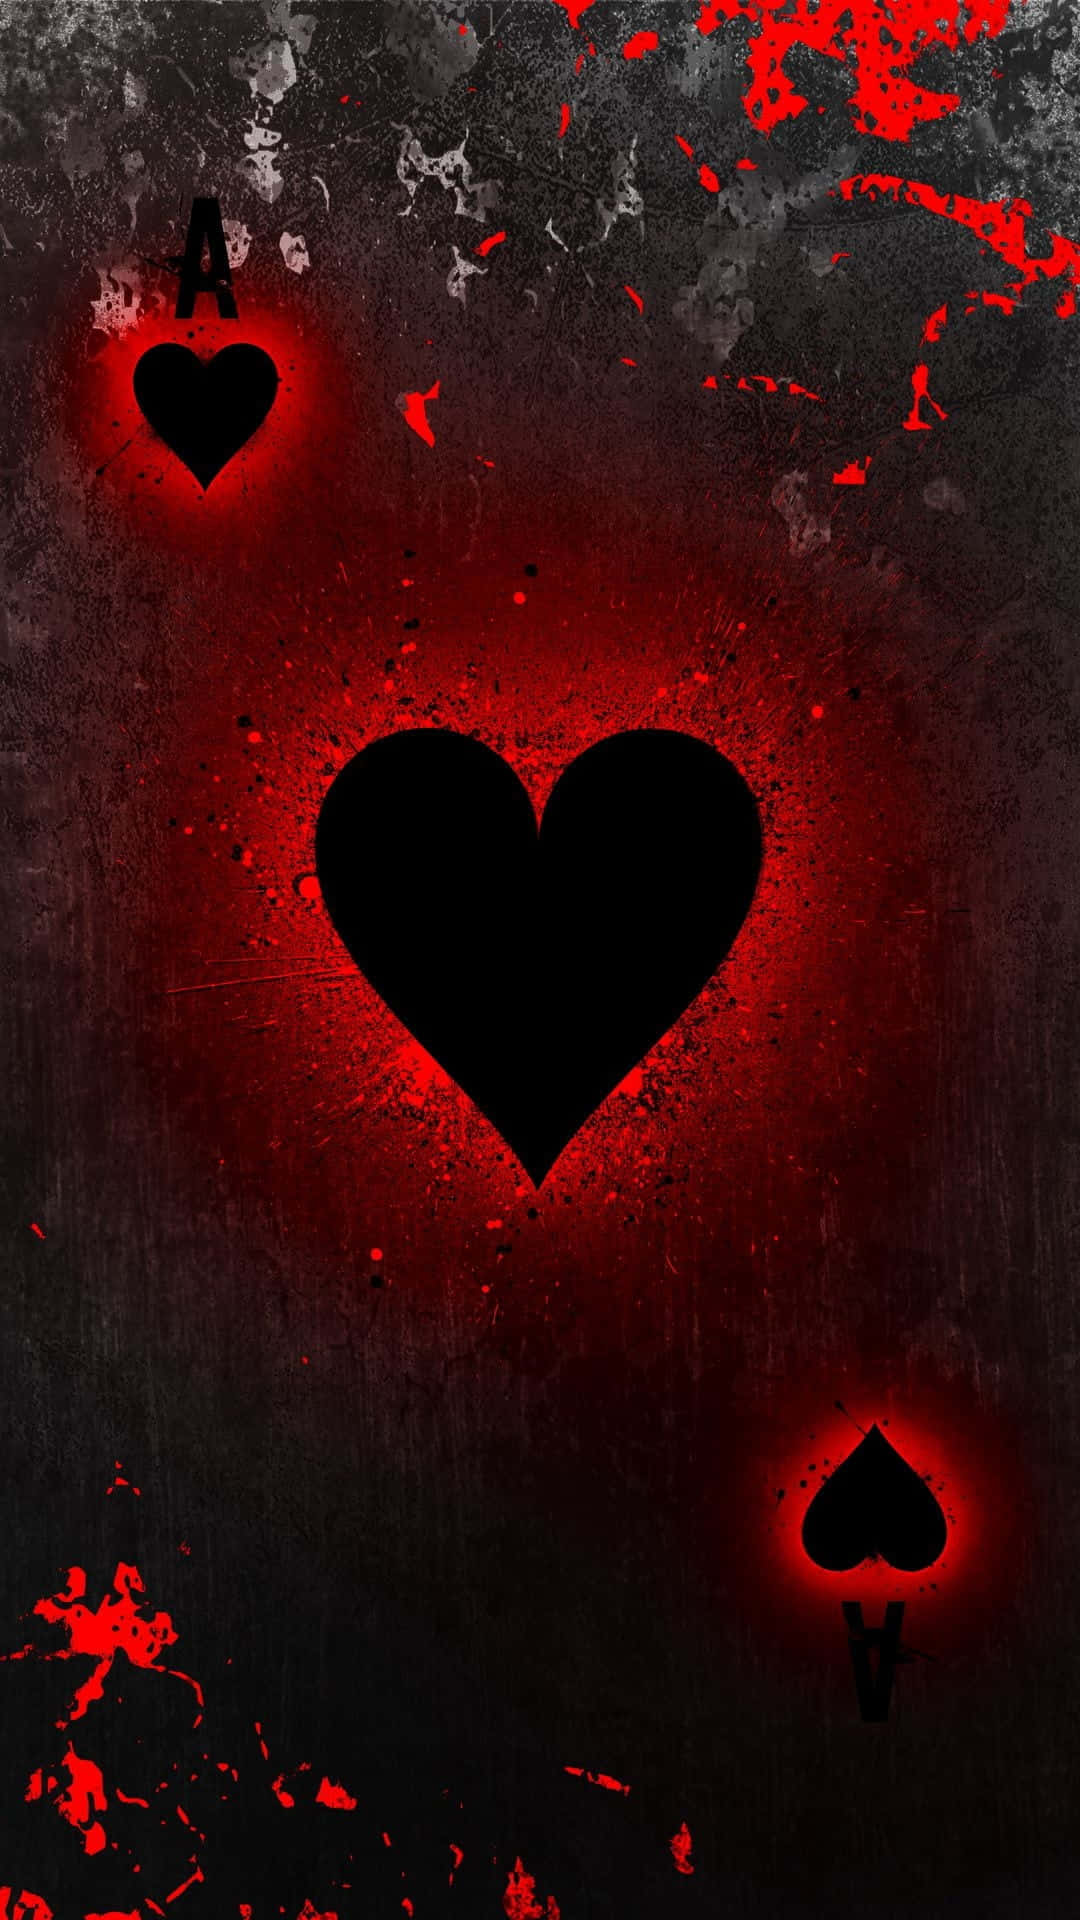 A black heart amidst shadows and twilight - the ultimate symbol of despair and sorrow